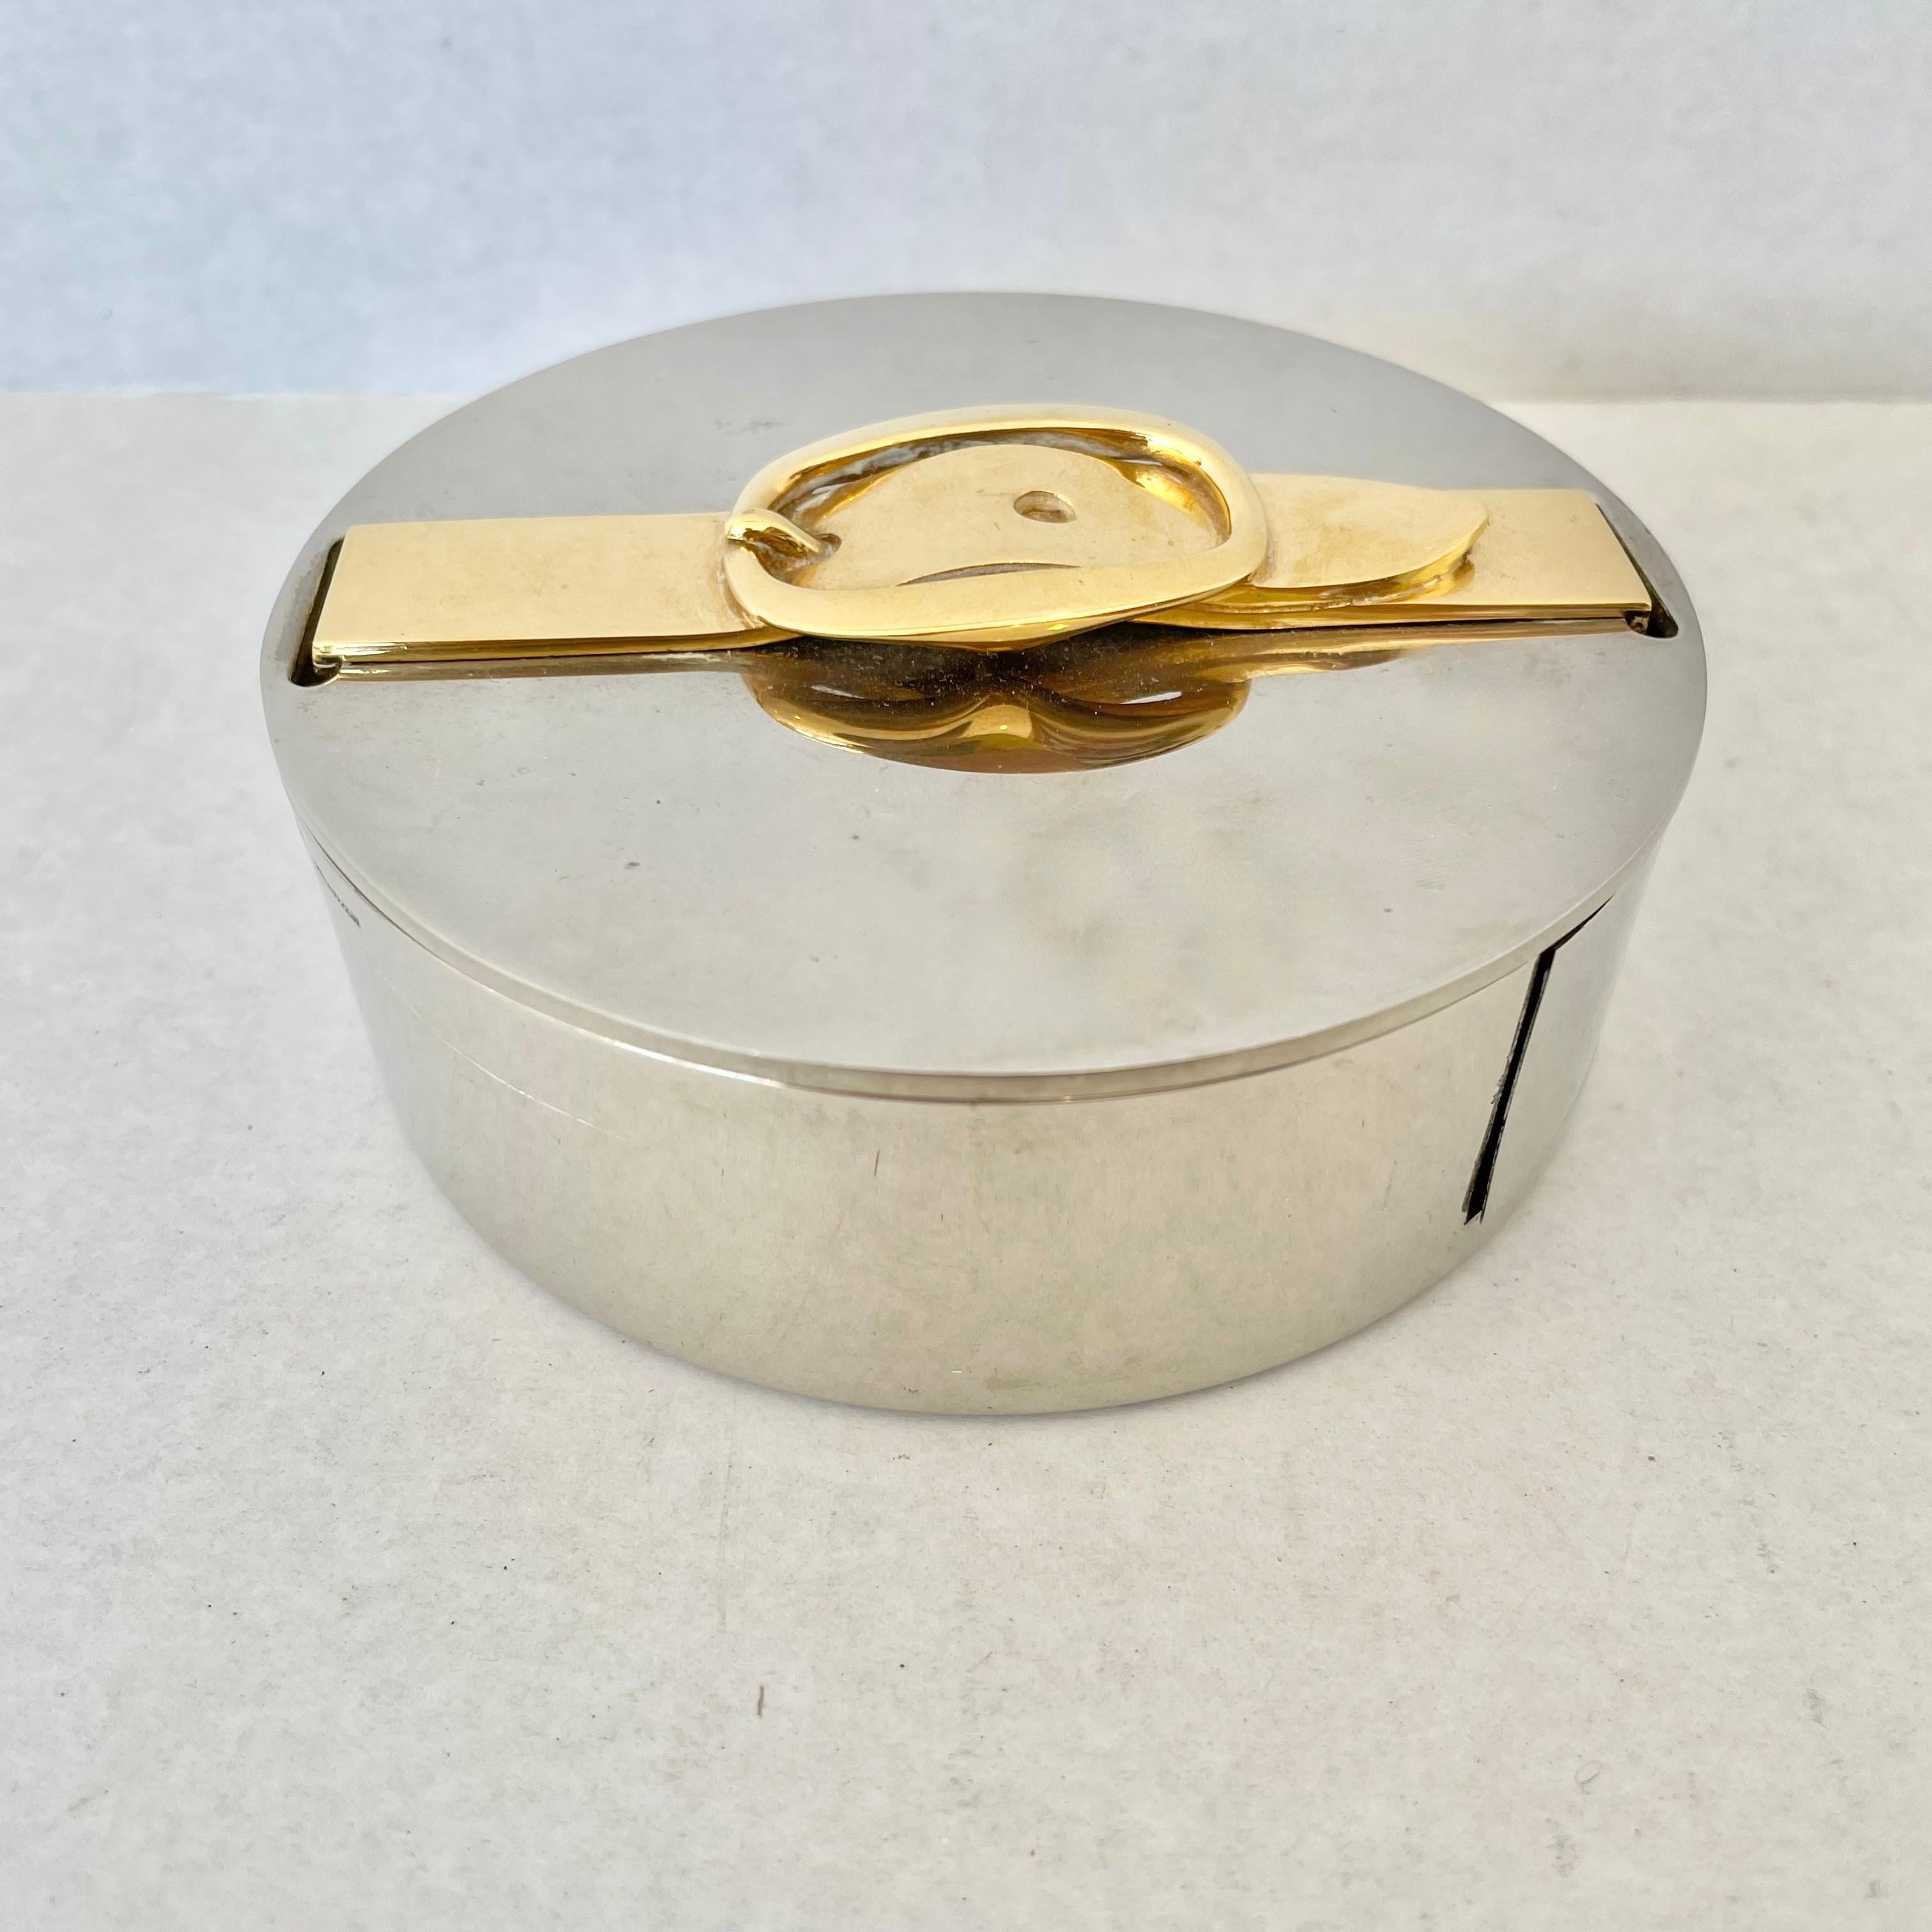 Classic vintage Hermès tape dispenser in silver with a brass belt buckle detail. Hermès PARIS, Made In France stamped on outer rim. Dispenser has a lid which opens up in order to easily switch rolls of tape out. Beautiful and functional accent piece